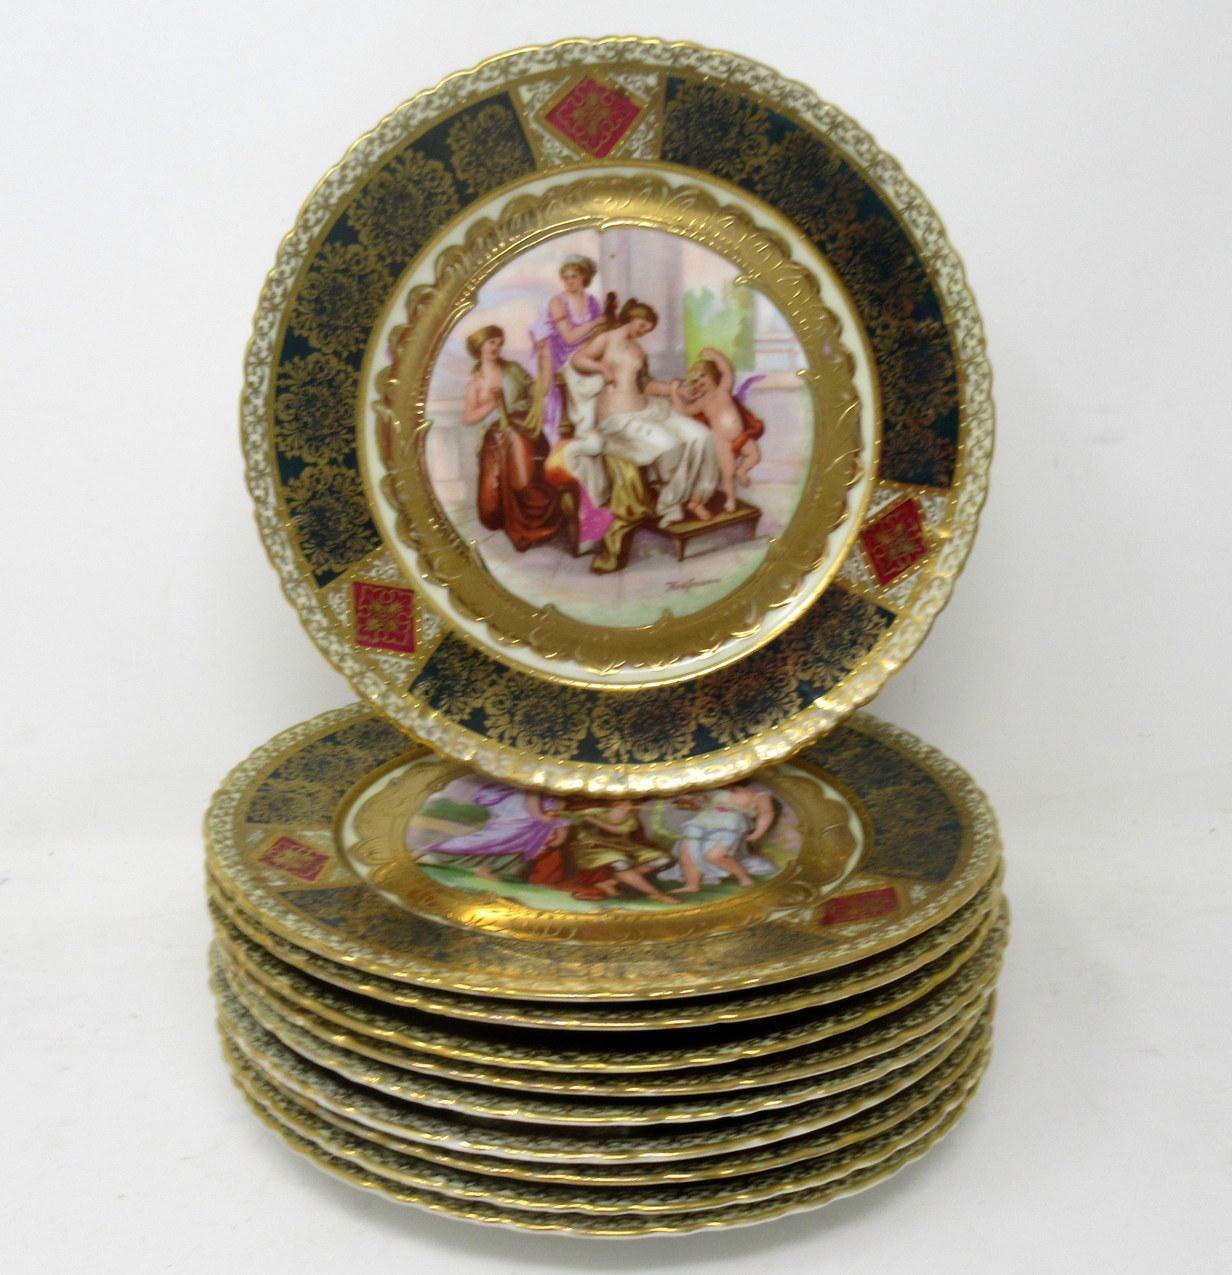 An exceptionally fine set of ten Austrian Royal Vienna signed porcelain cabinet plates or wall hanging plaques, third quarter of the Nineteenth century. 

Each plate with an exquisite all round frieze of hand painted highly detailed decorations on